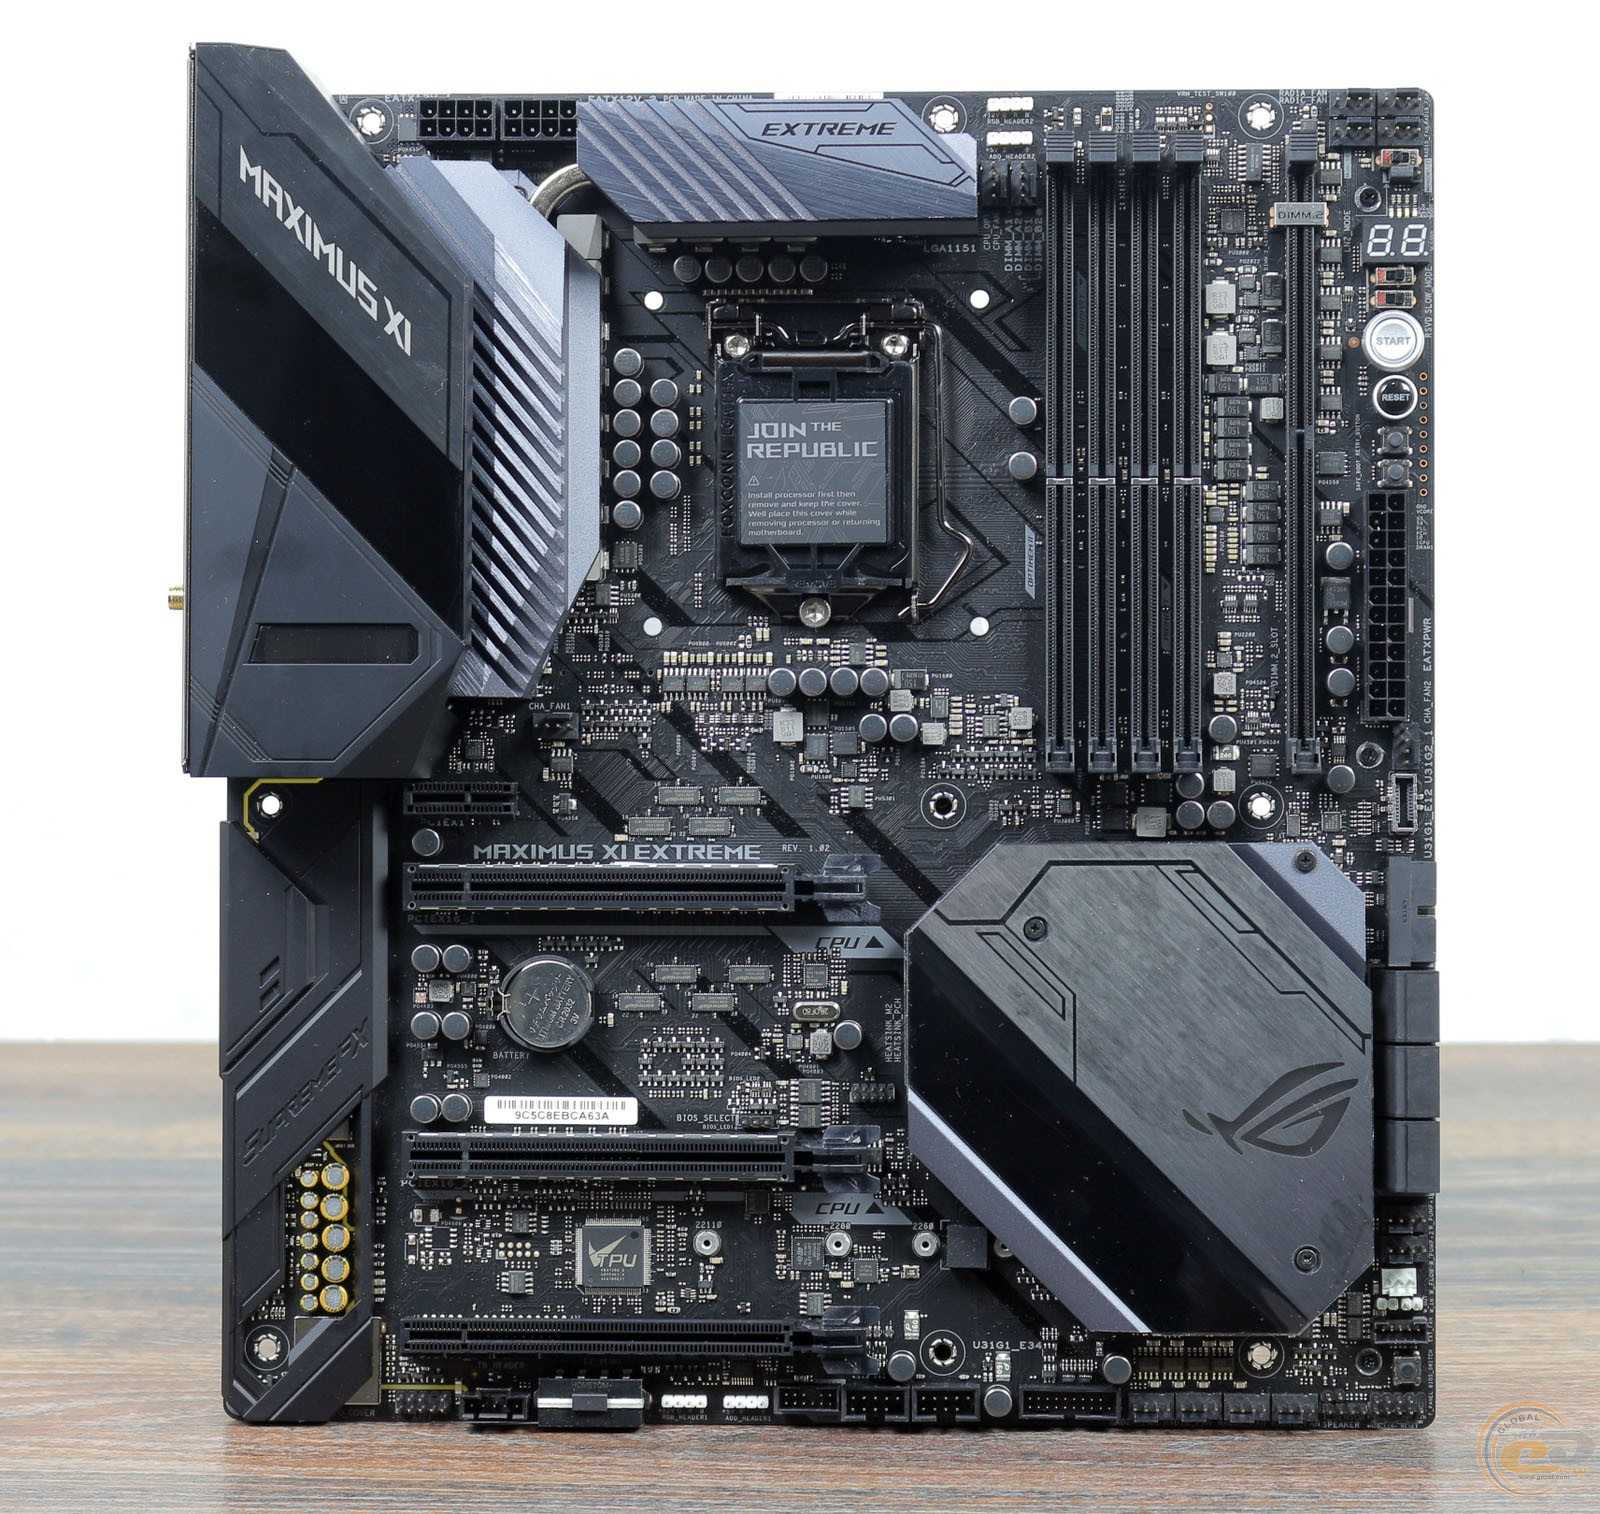 ▷ asus maximus v extreme manual, asus motherboard maximus v extreme operation and user’s manual (246 pages) | guidessimo.com